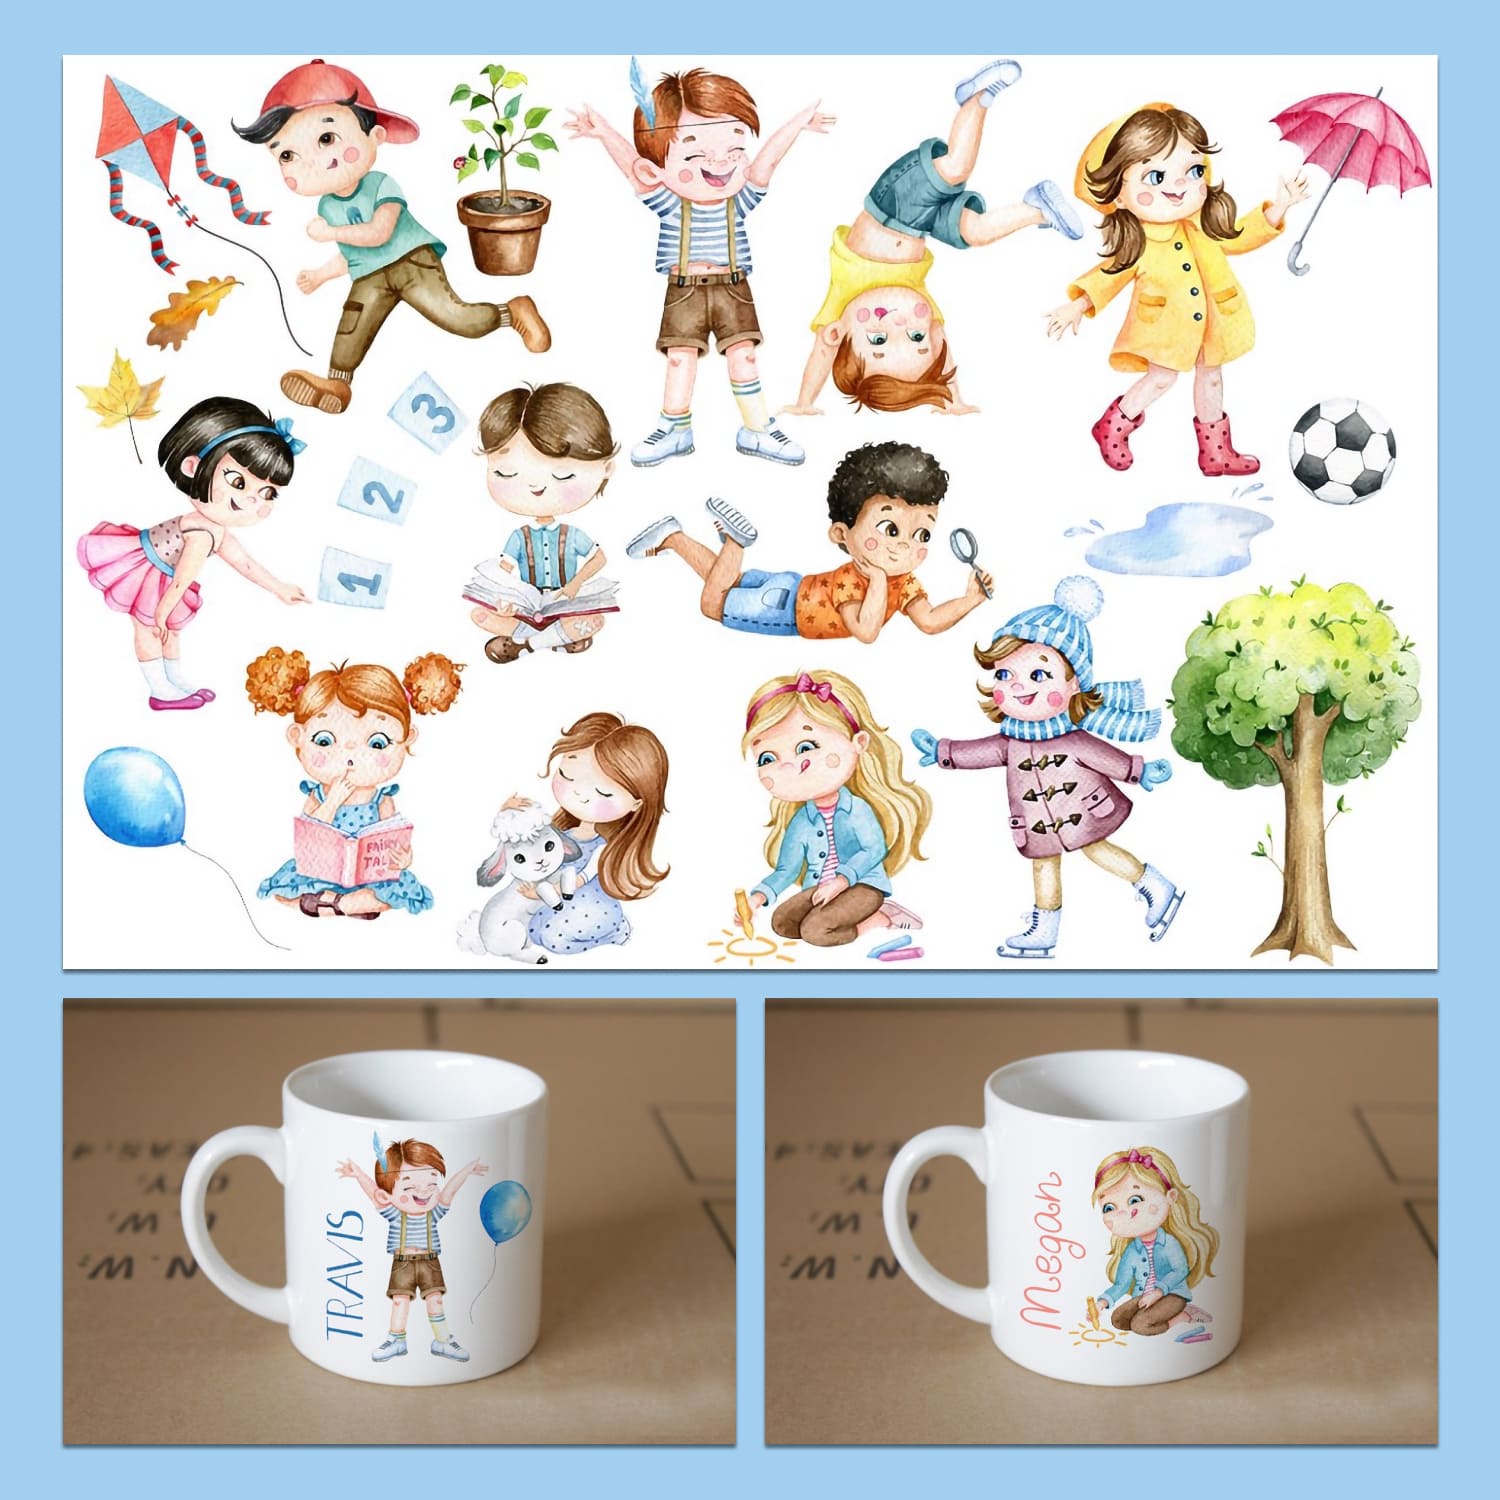 Happy Kids,Primary school Clipart created by SimpleWishesArt.